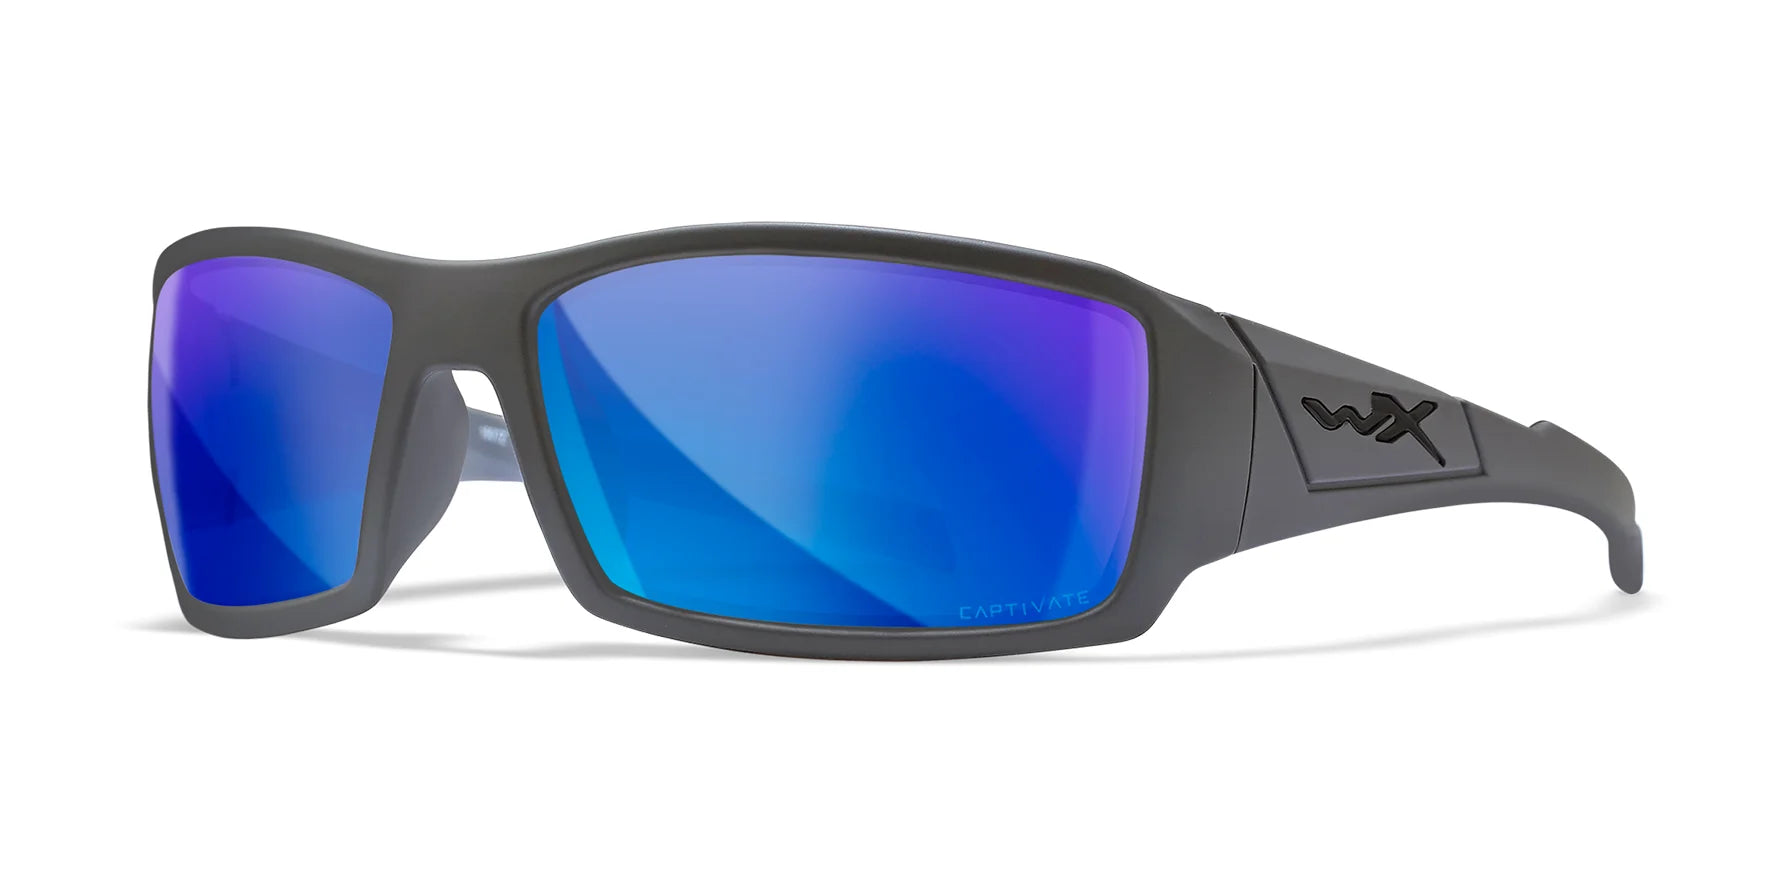 Wiley X TWISTED Sunglasses Matte Grey / CAPTIVATE™ Polarized Blue Mirror